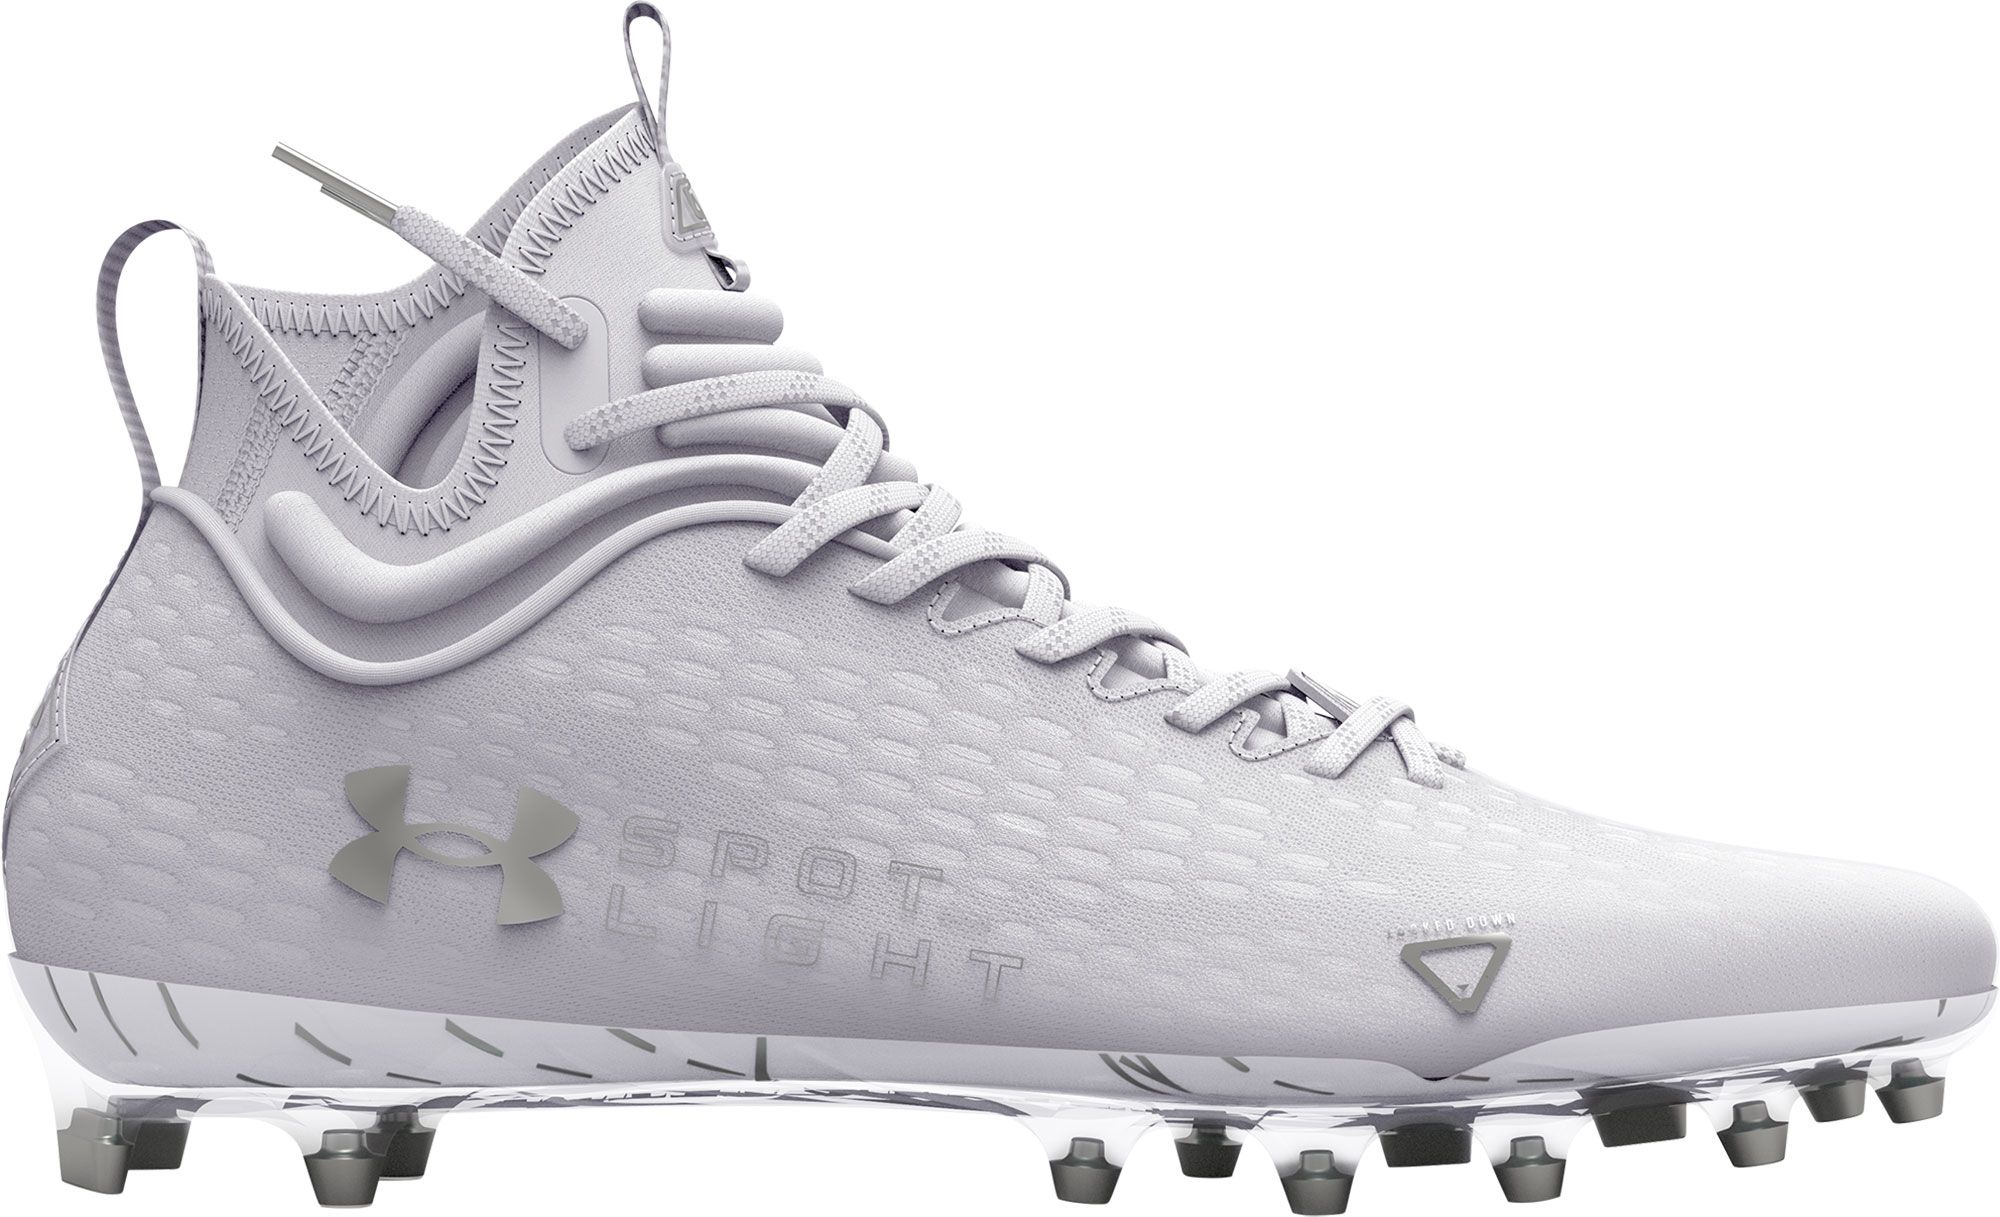 Top seven football cleats for 2022 season - Tampa Bay High School